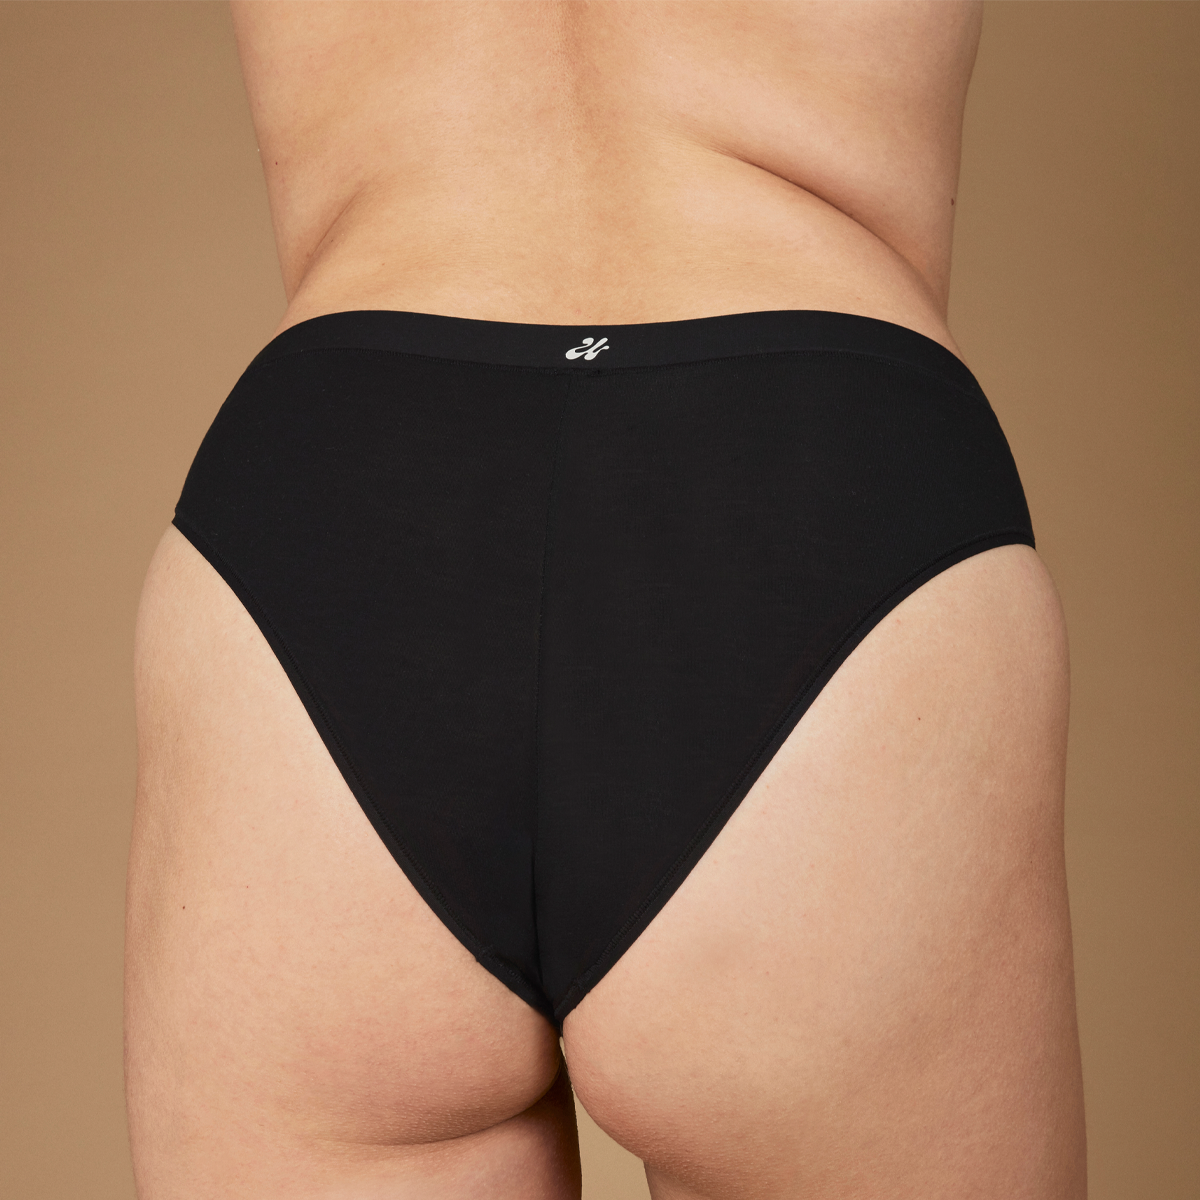 Review: Awry Cheeky Thong - The Bottom Drawer